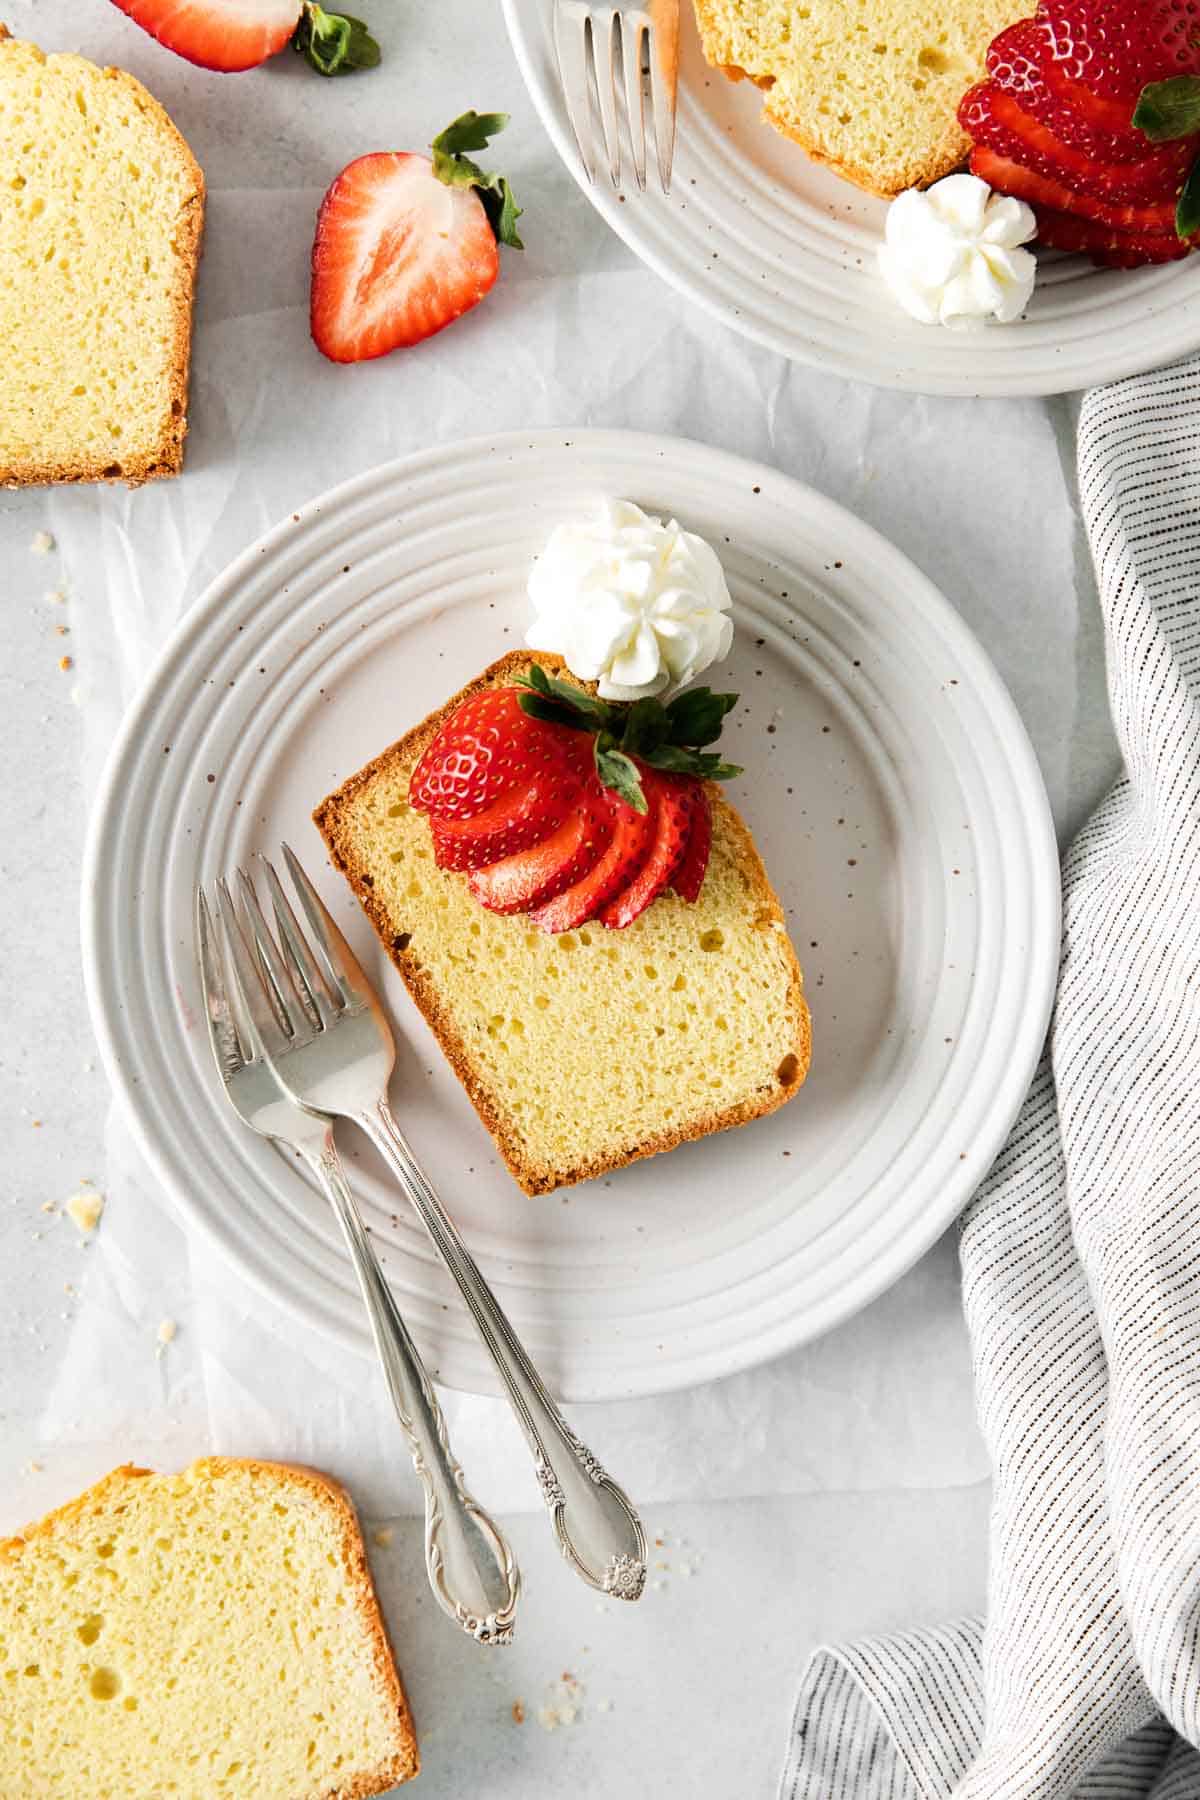 A slice of cake on a plate, topped with strawberries and cream